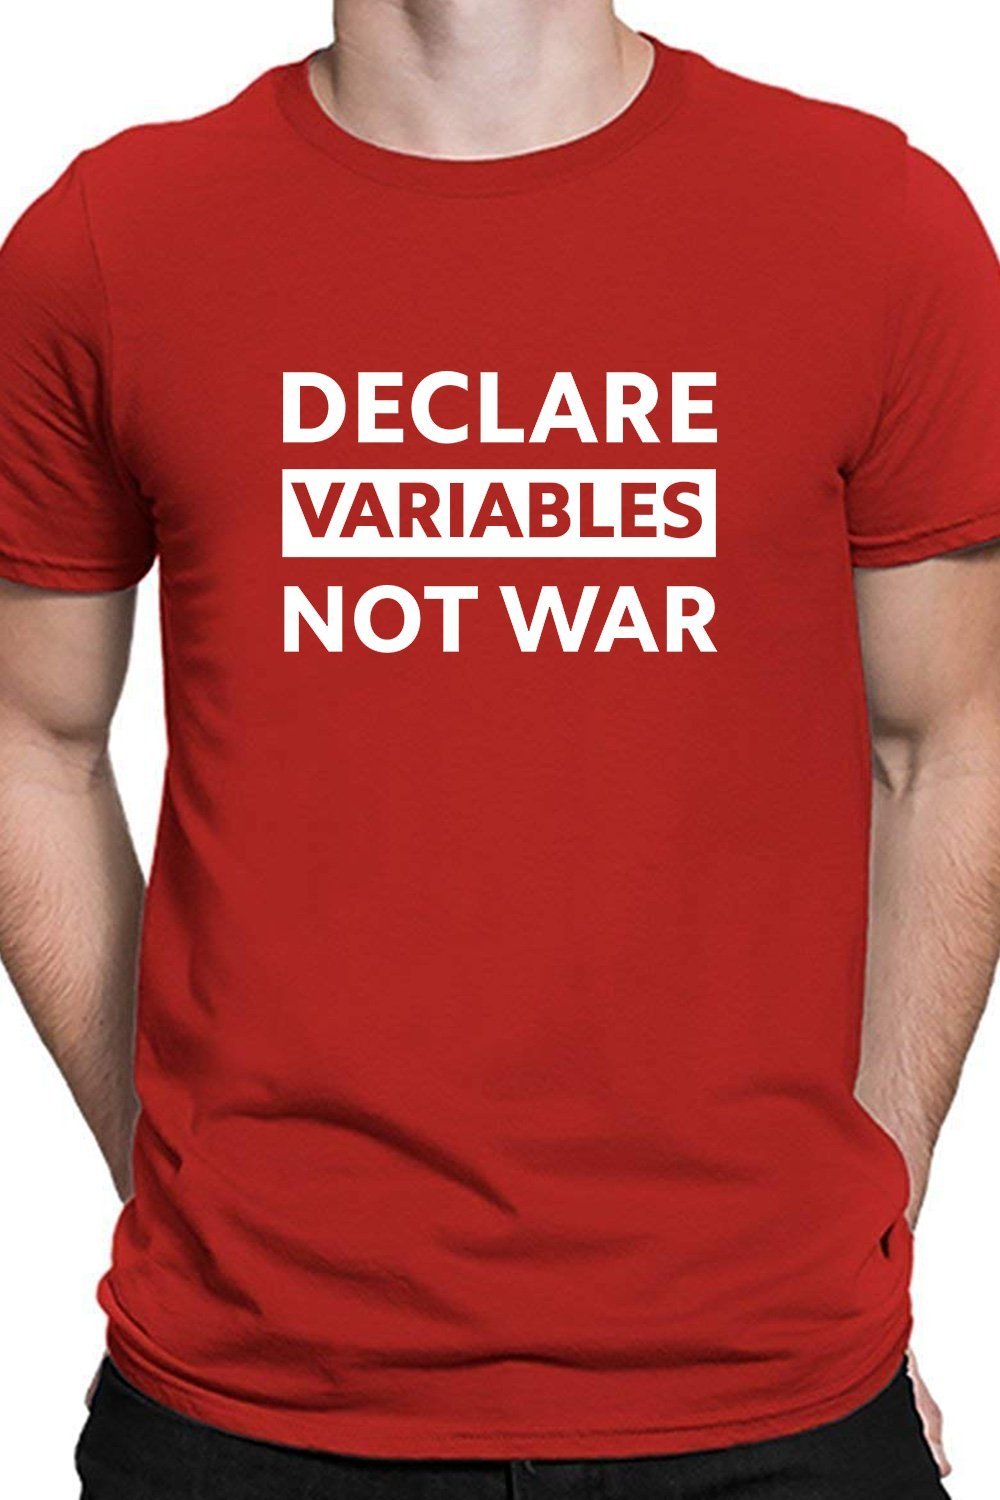 Declare Variables Not War - Red Round Neck Casual Graphic Printed Cotton T-Shirt